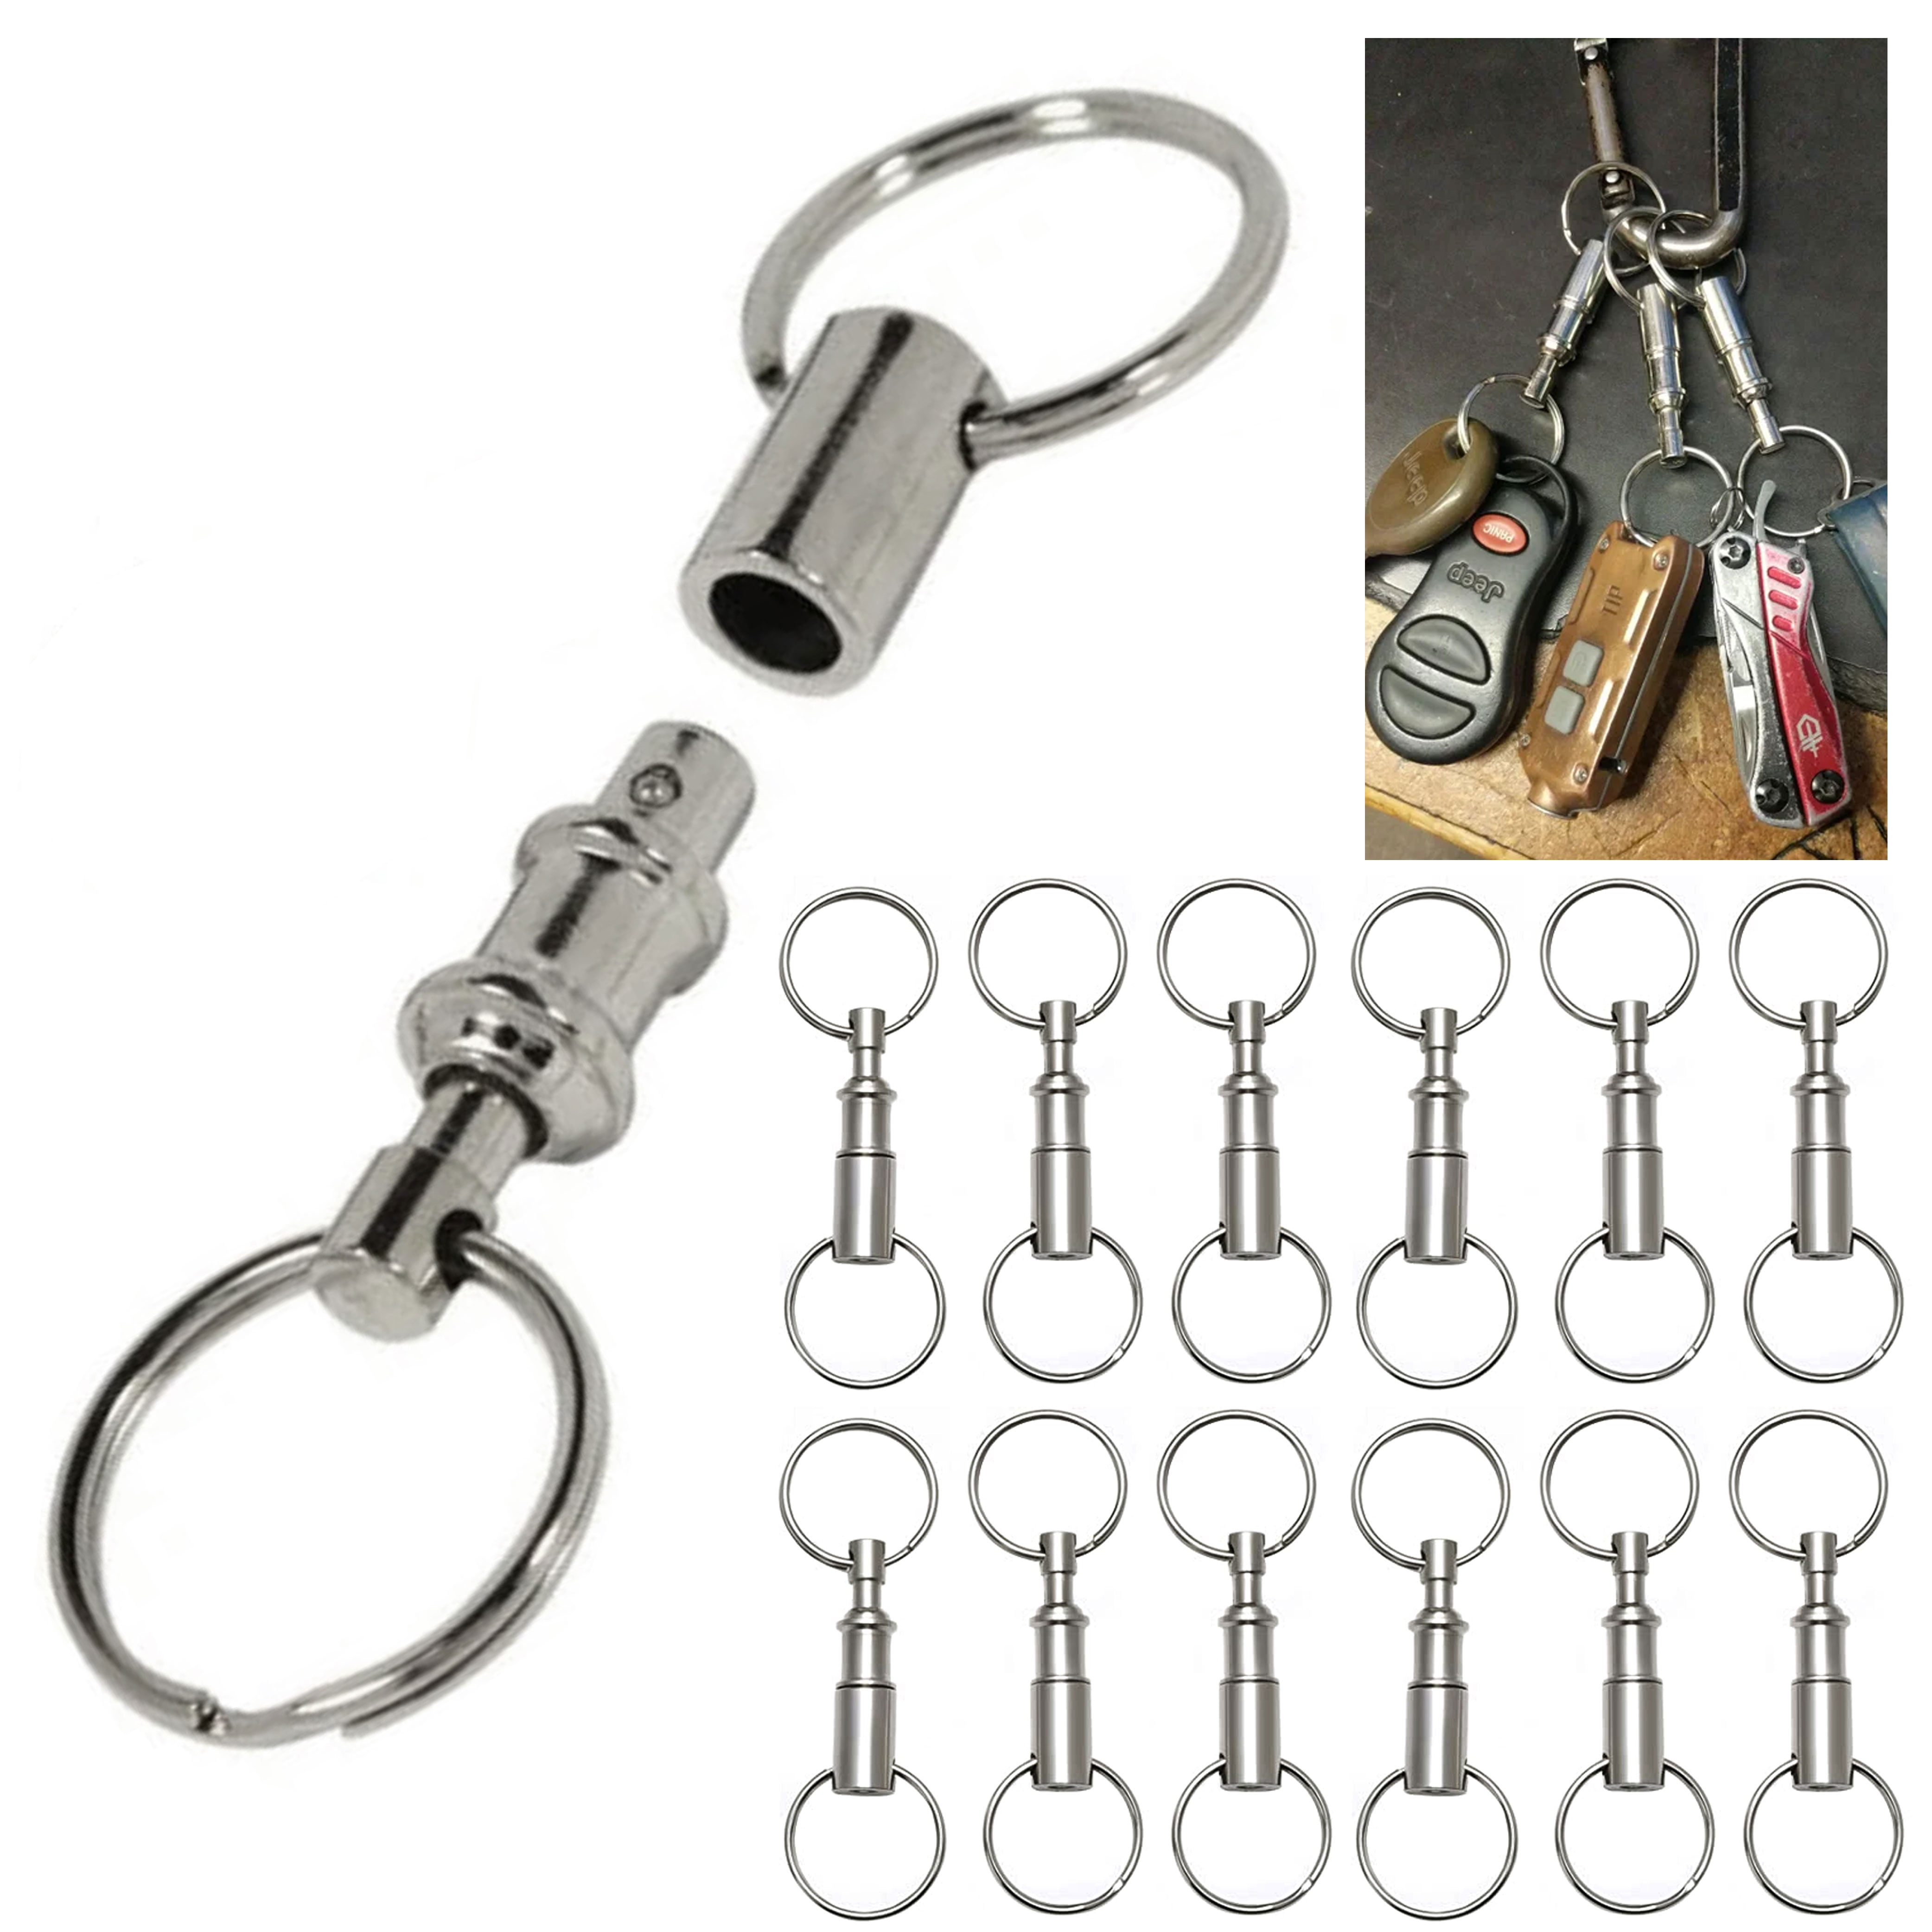 Free Shipping Aluminum 2.5" Lots 12PC Carabiner Spring Belt Clip Key Chain 